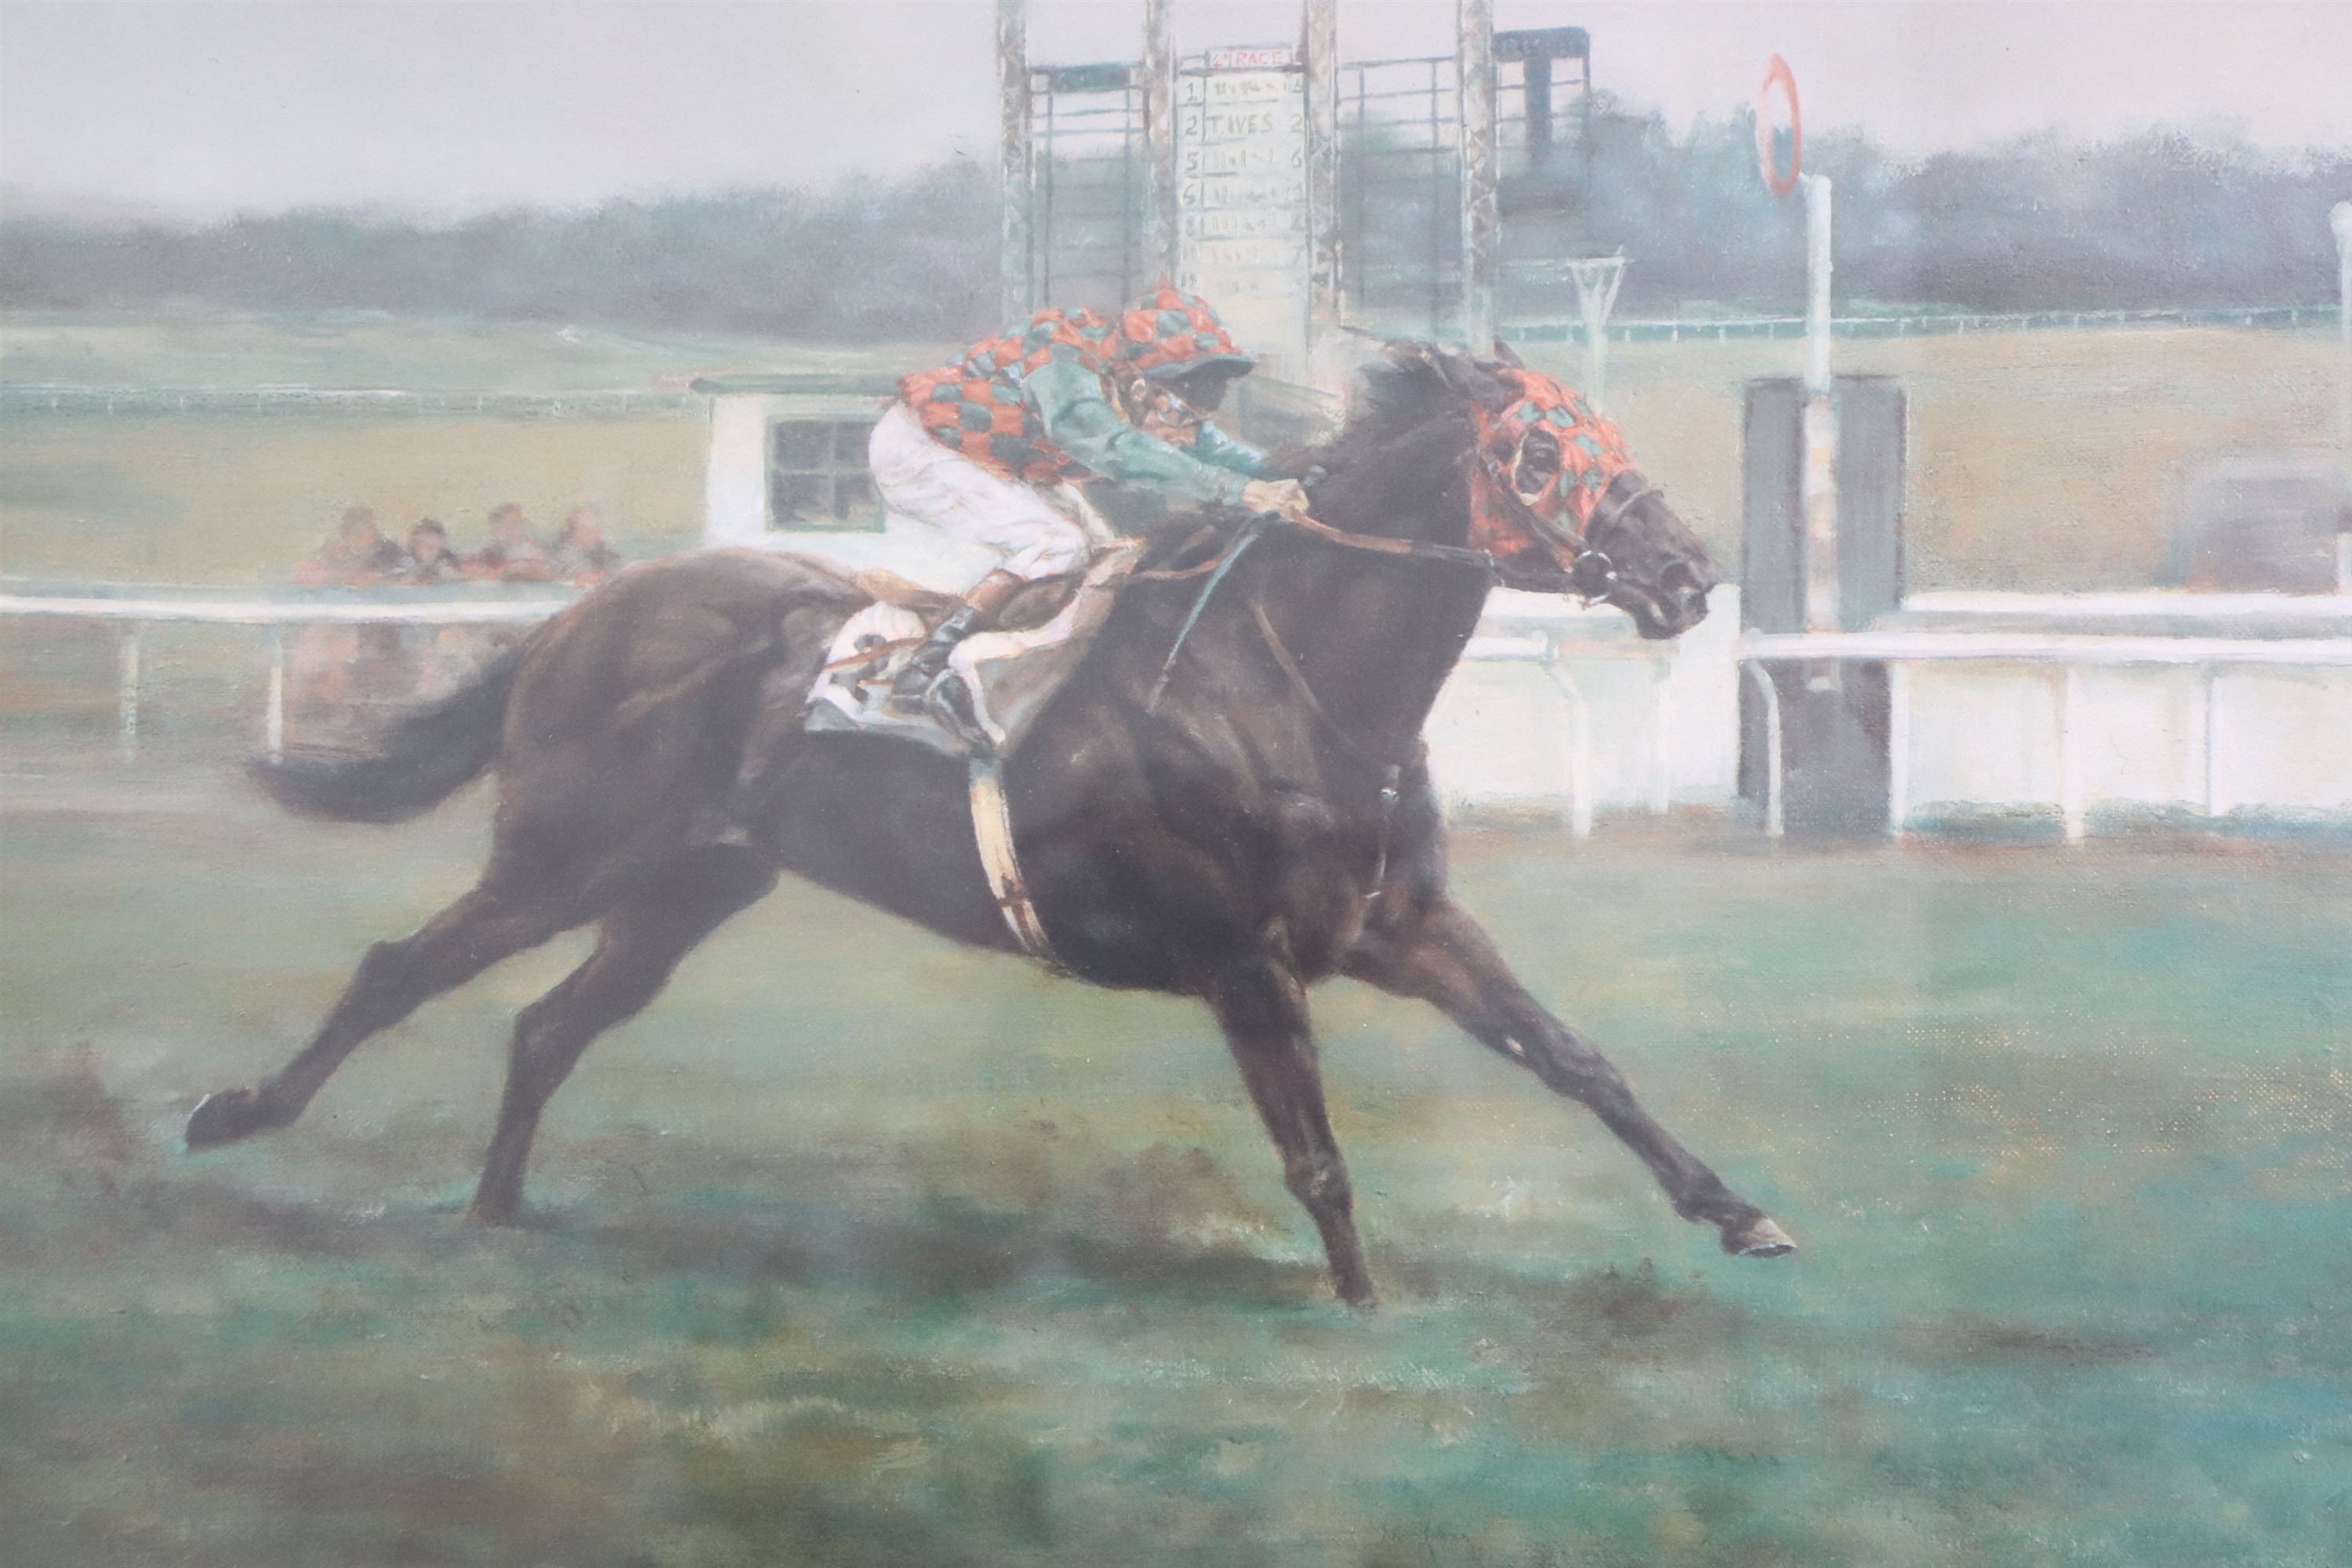 [ Horse Racing ] After Claire Eva Burton (British, b. 1955) "Provideo", a study of jockey and